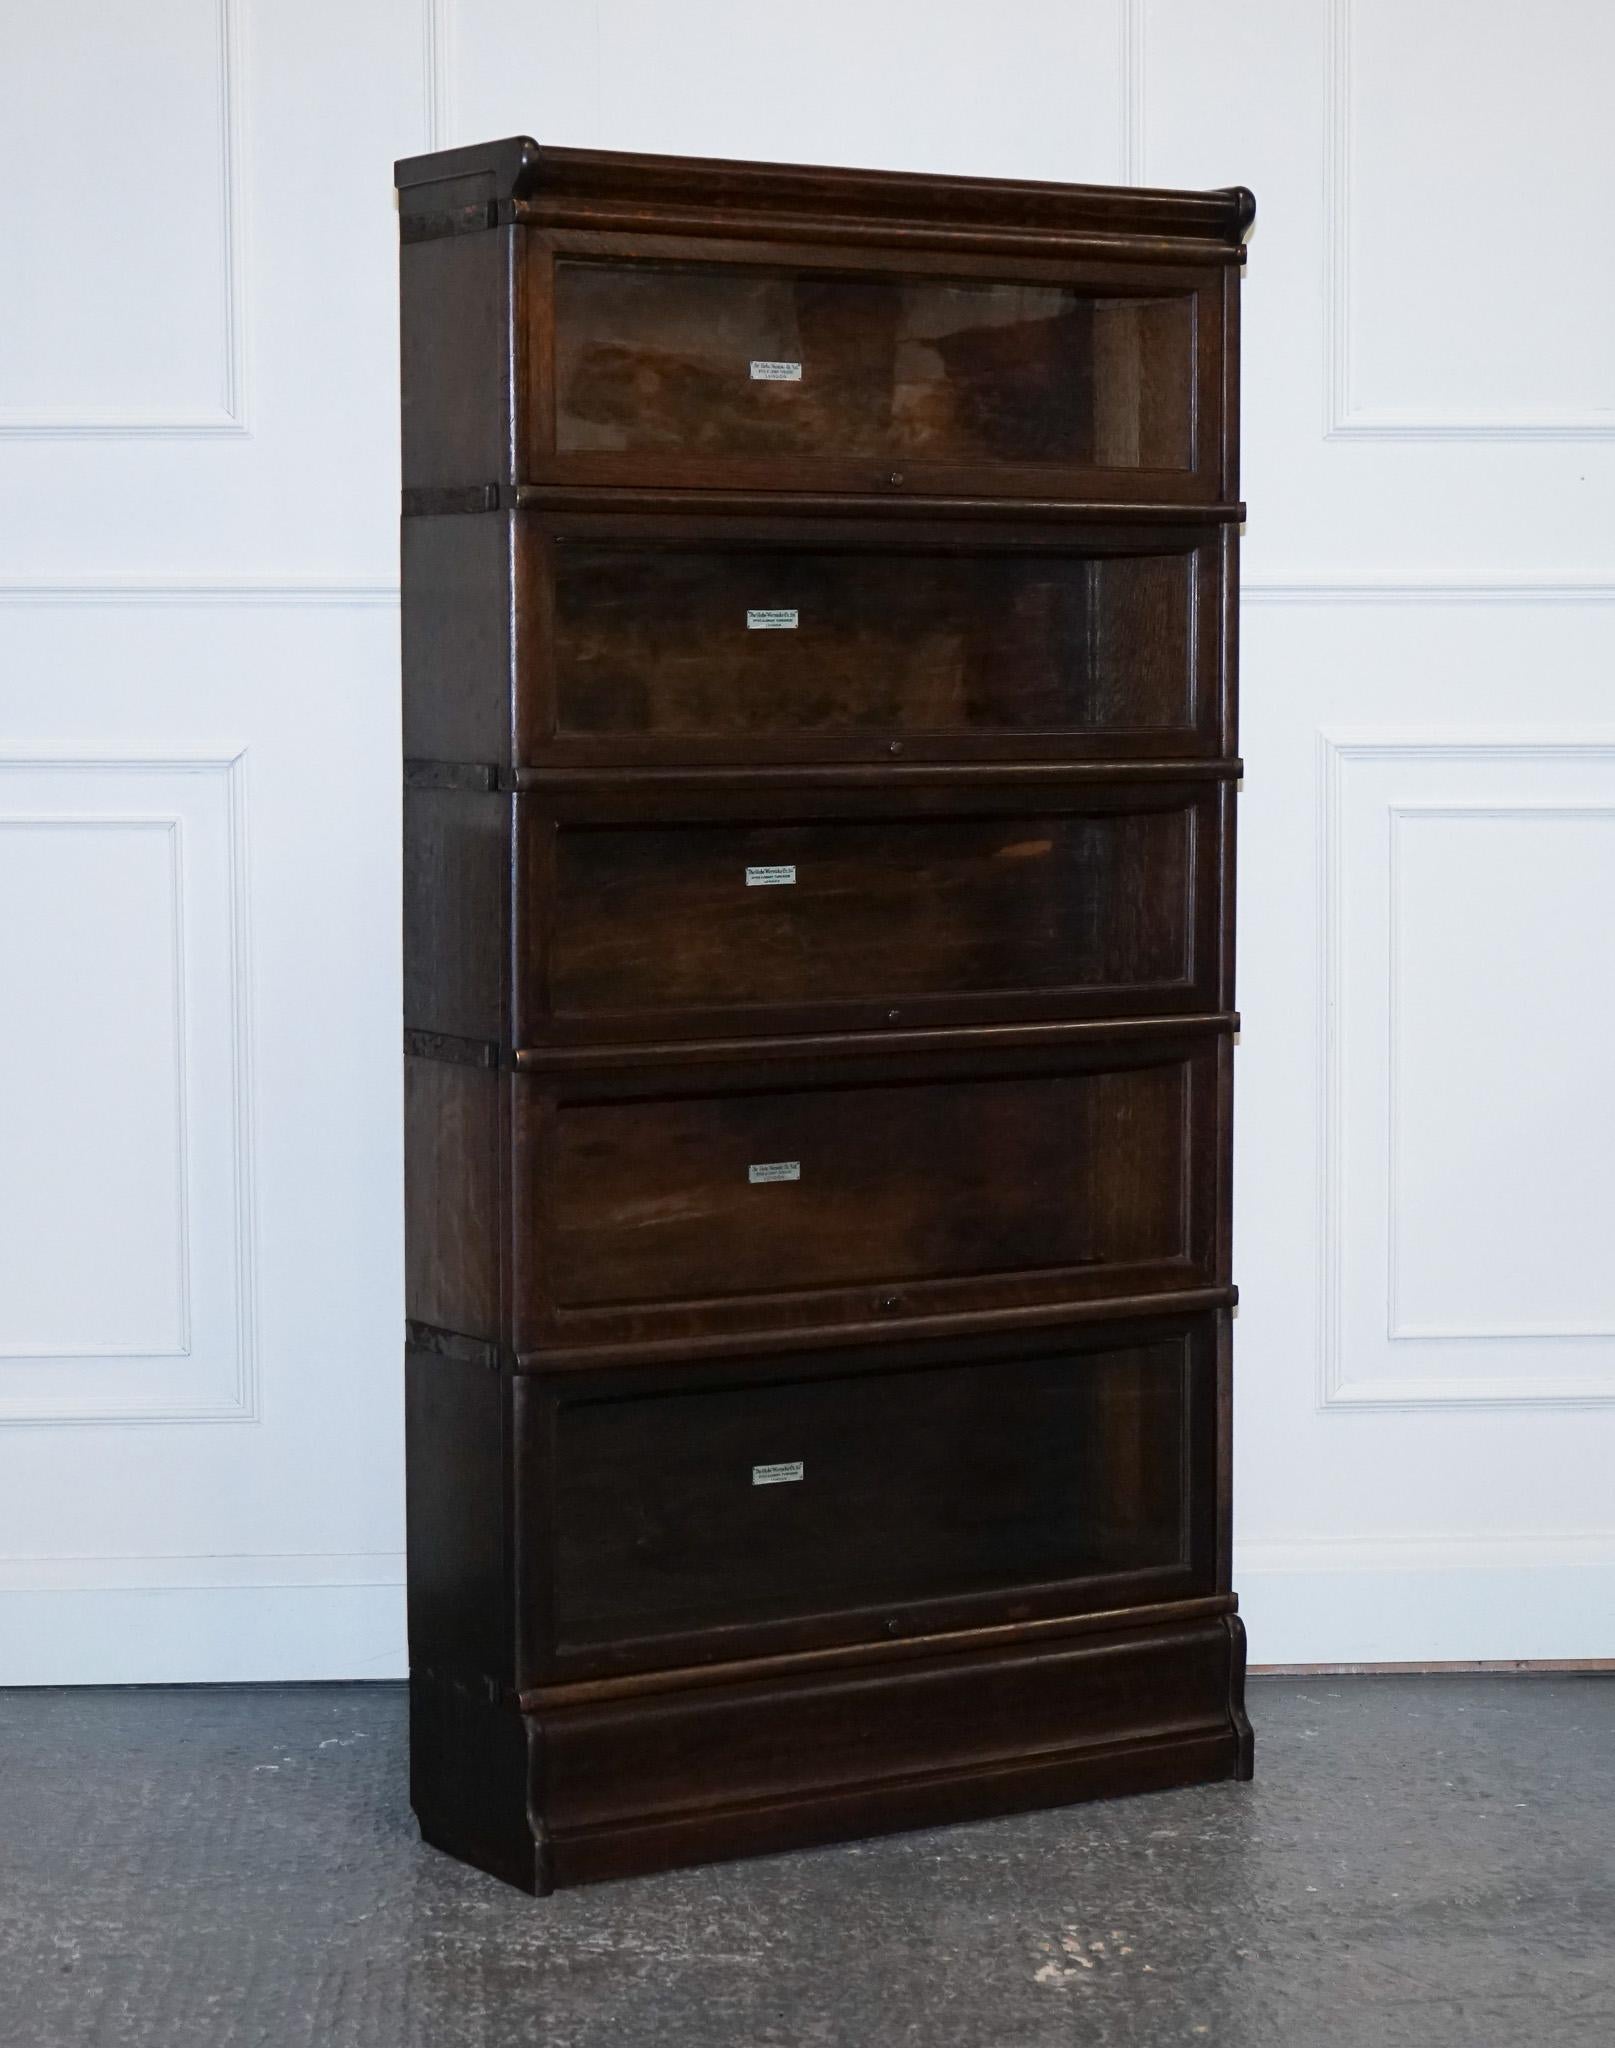 We are delighted to offer for sale this Beautiful 5 Tier Globe Wernicke Barrister Bookcase.

A set of 5 antique Globe Wernicke oak glass stacking library barrister modular bookcases would be a stunning addition to any home library or office space.